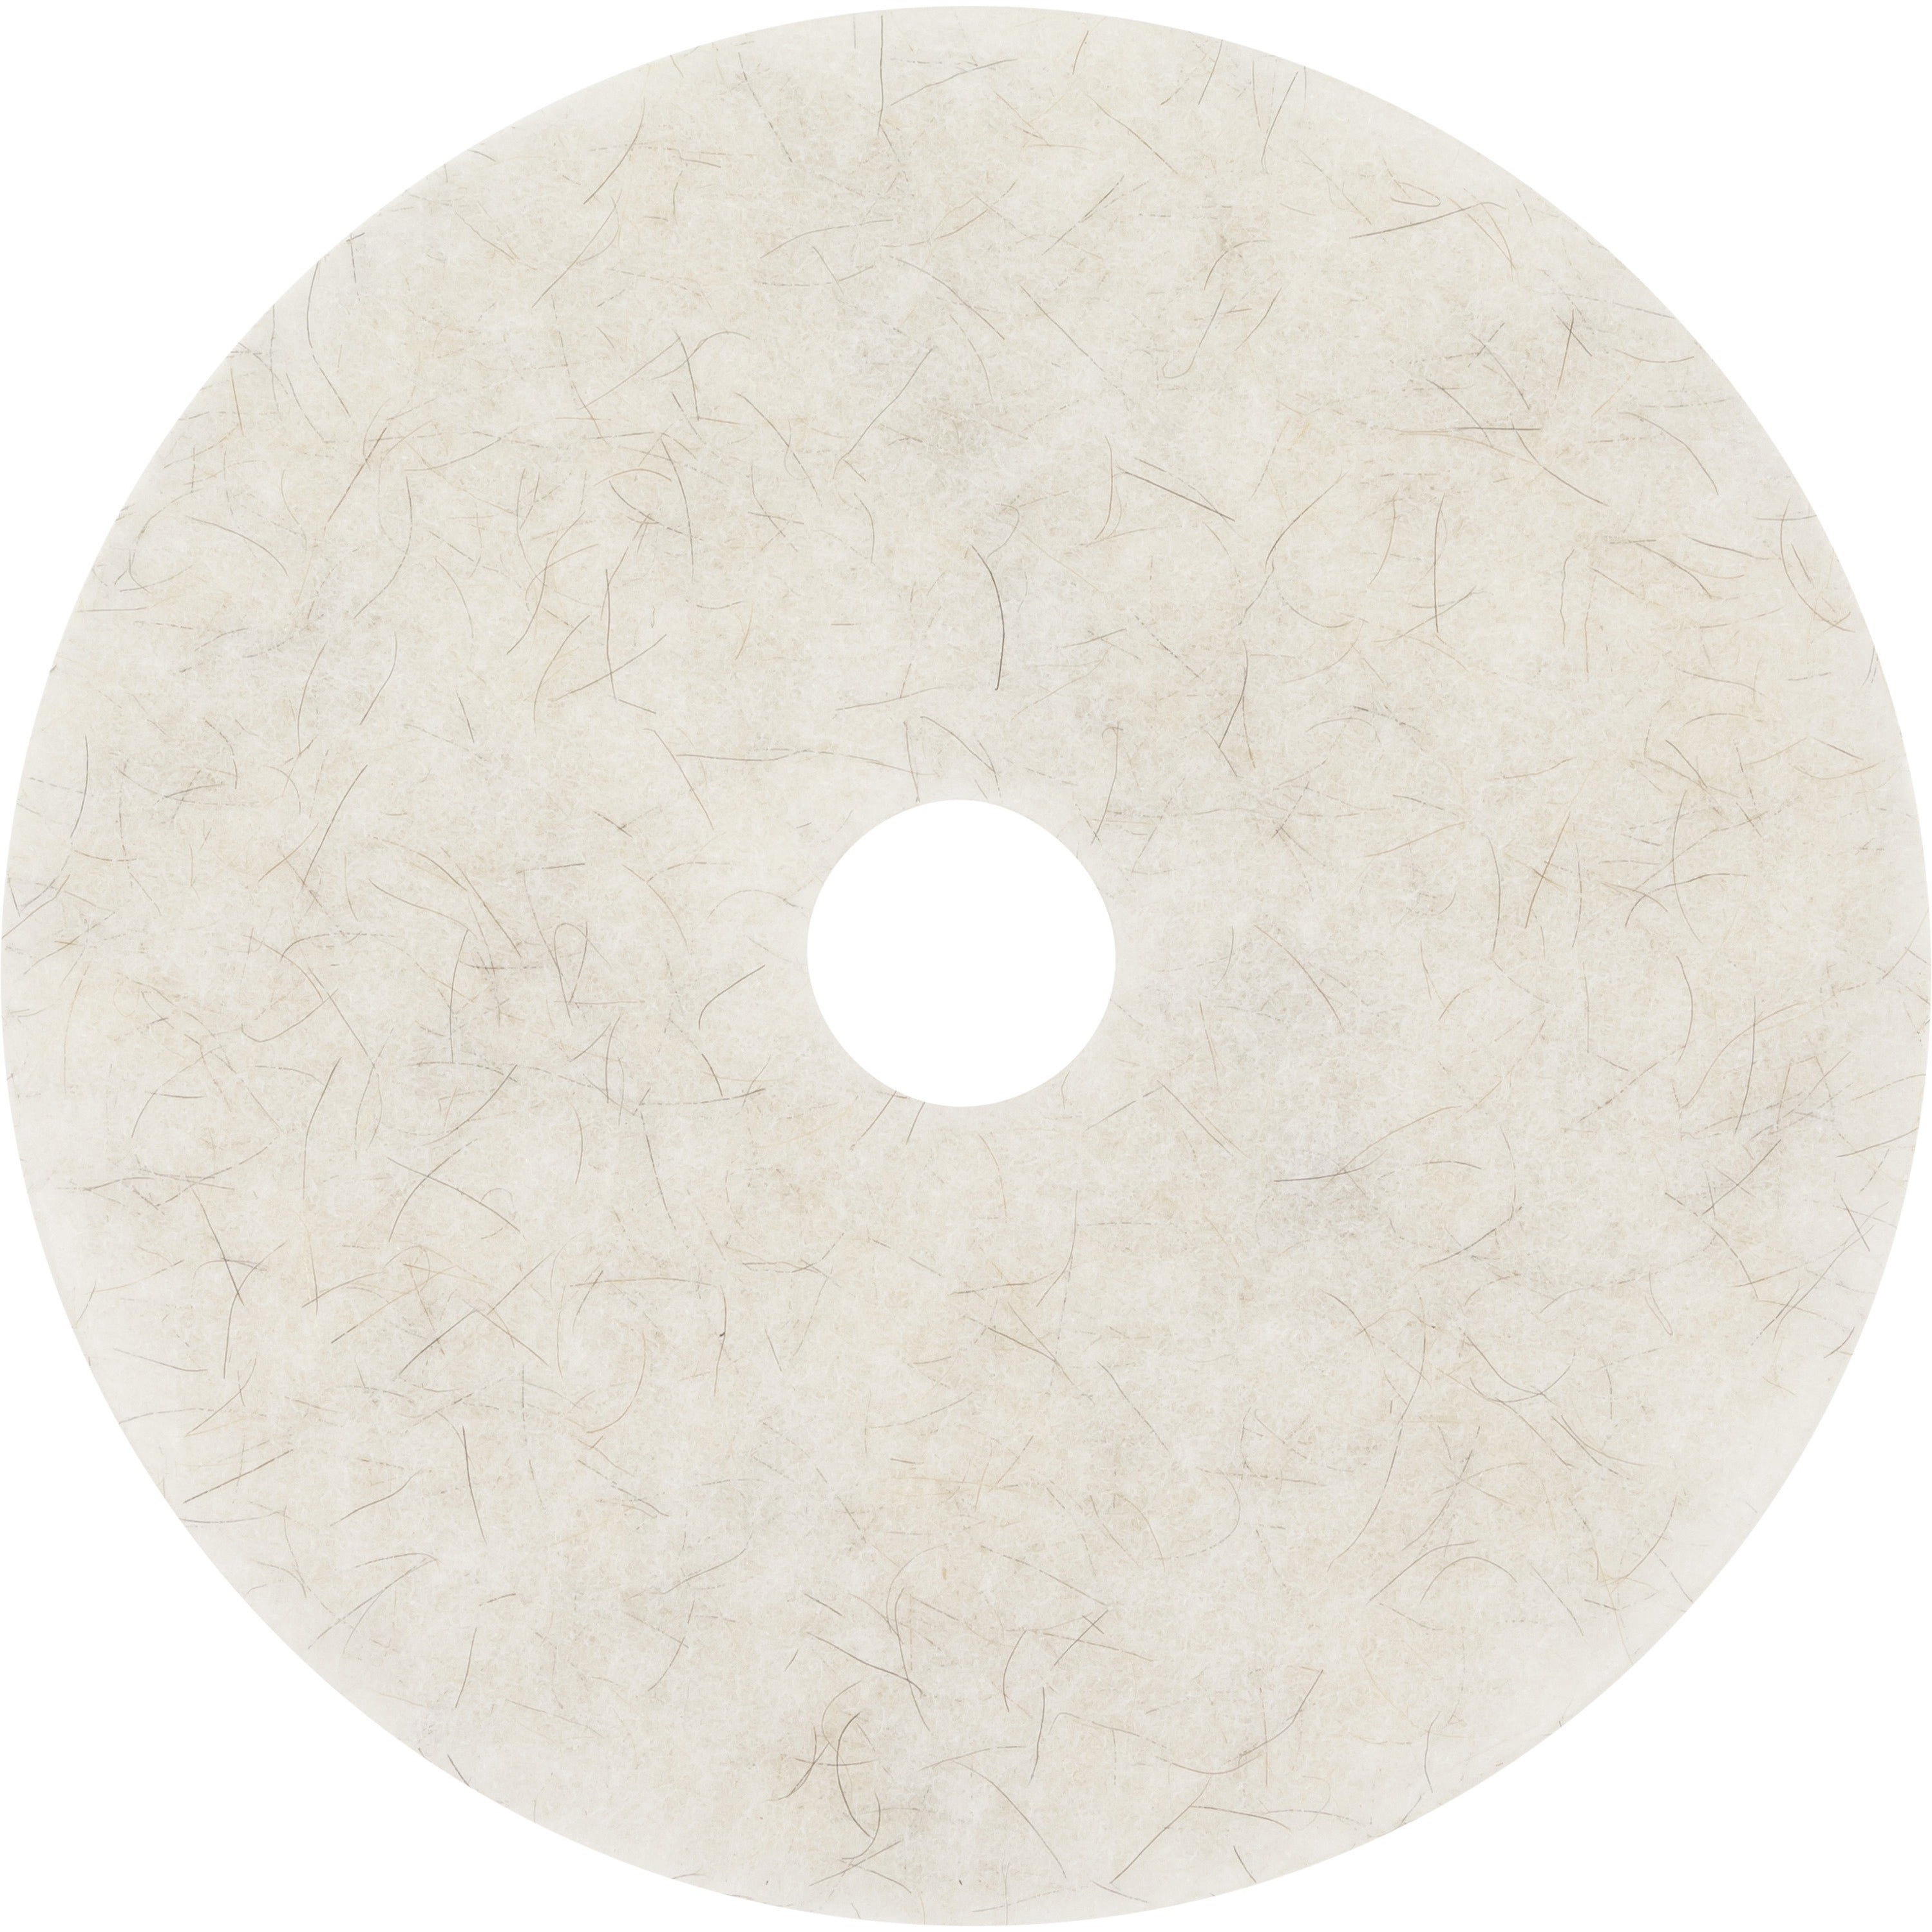 Niagara 3300N Floor Pads - 5/Carton - Round x 27" Diameter x 1" Thickness - Burnishing, Polishing, Buffing - 1500 rpm to 3000 rpm Speed Supported - Scuff Mark Remover, Clog Resistant - Polyester Fiber, Resin - White - 